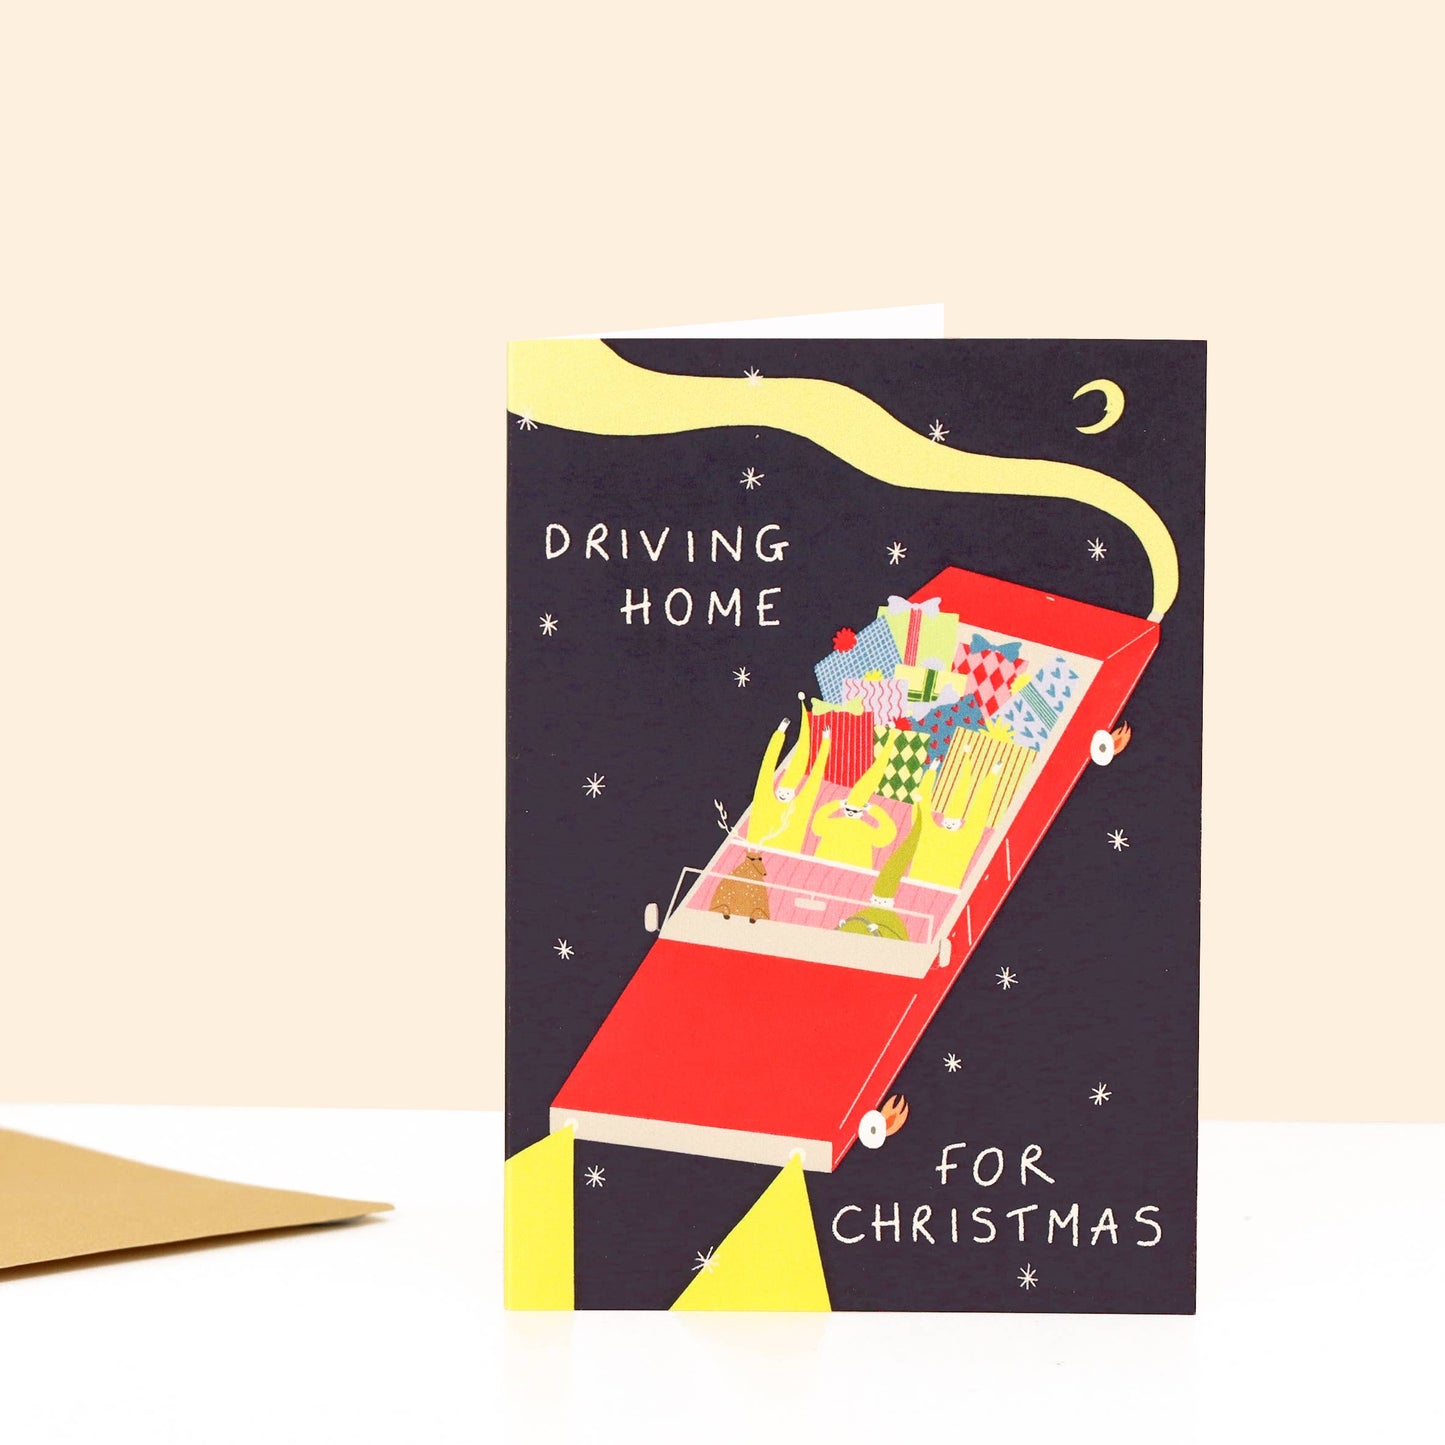 Little Black Cat Illustrated Goods - Driving Home For Christmas Card | Elves | Presents | Funny